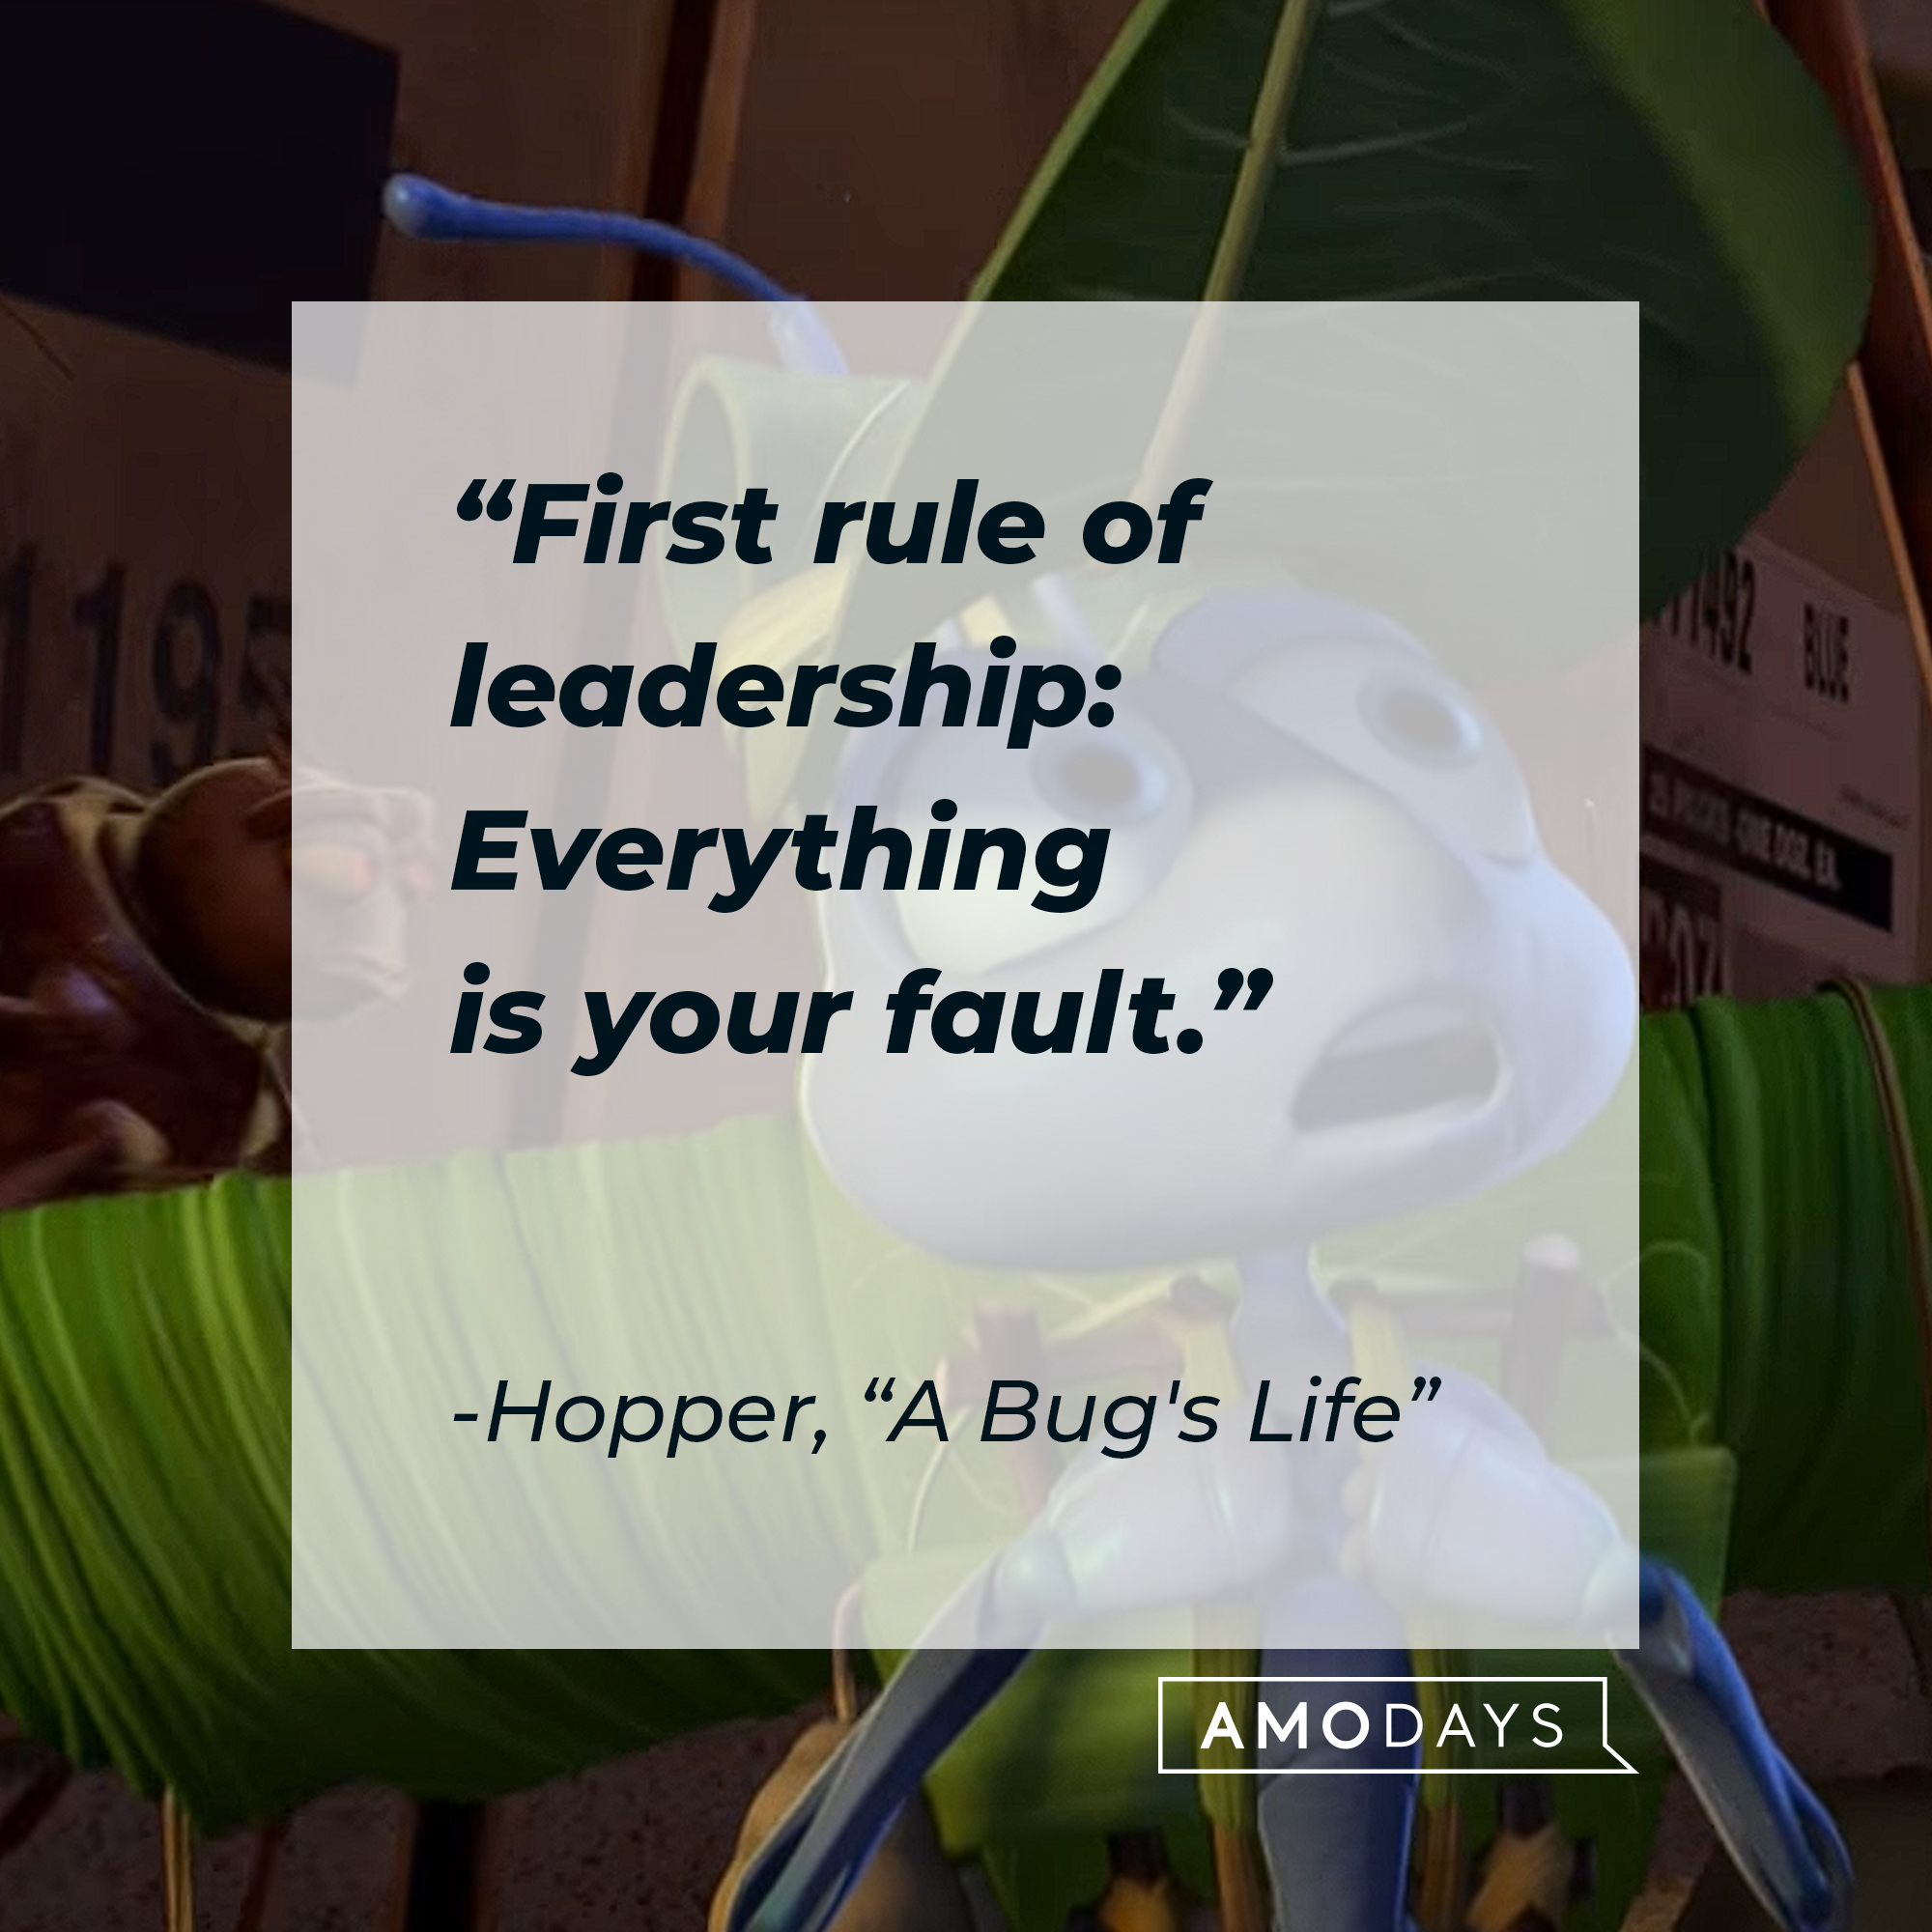 Hopper's "A Bug's Life" quote: "First rule of leadership: Everything is your fault." | Source: Youtube.com/pixar